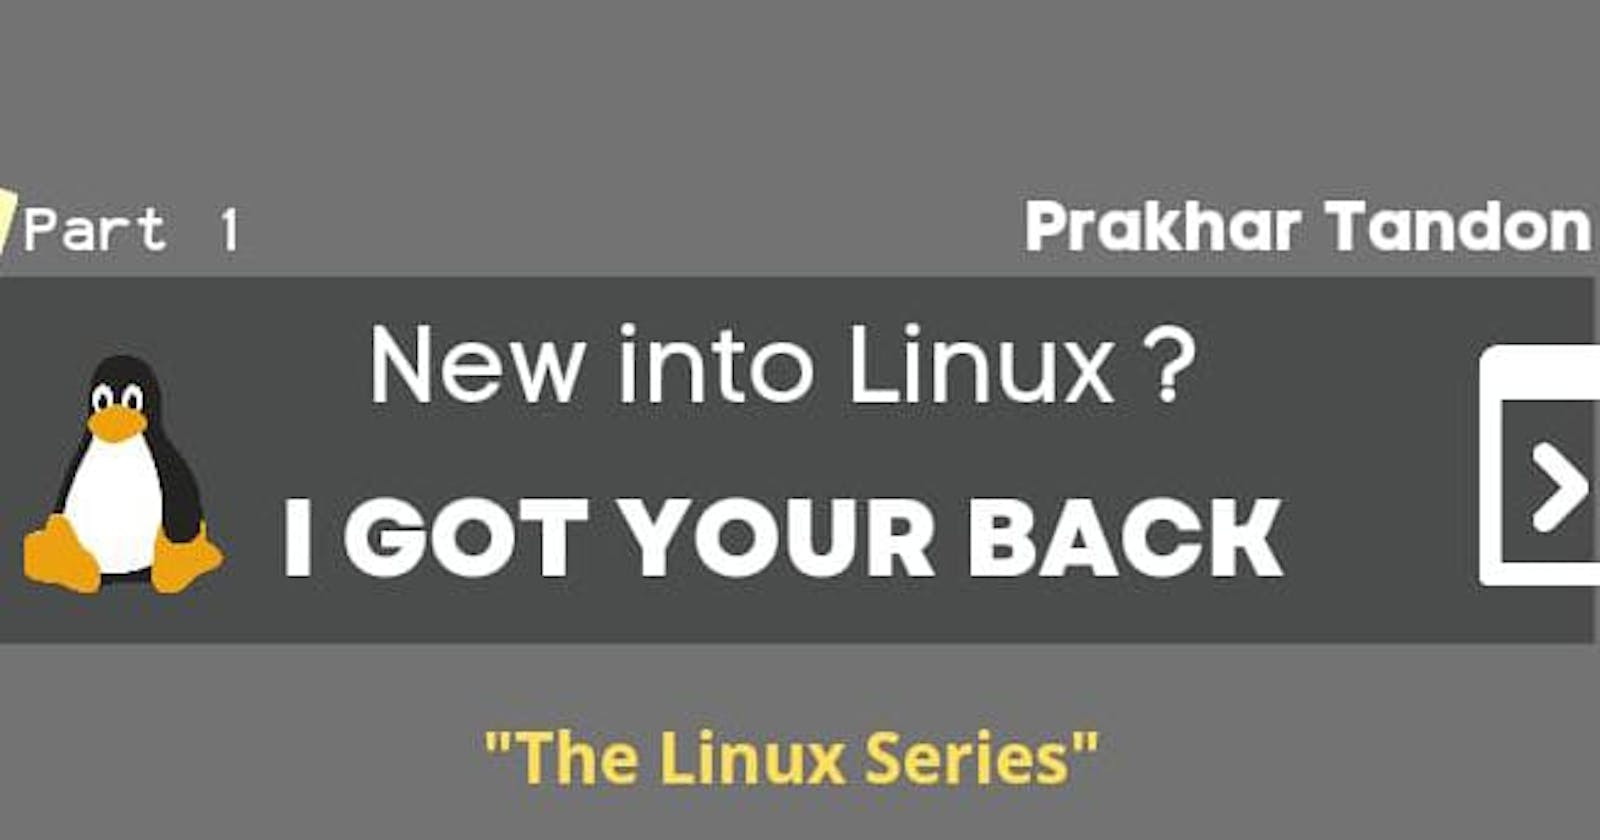 New into Linux ? Don't worry.... I got your back.